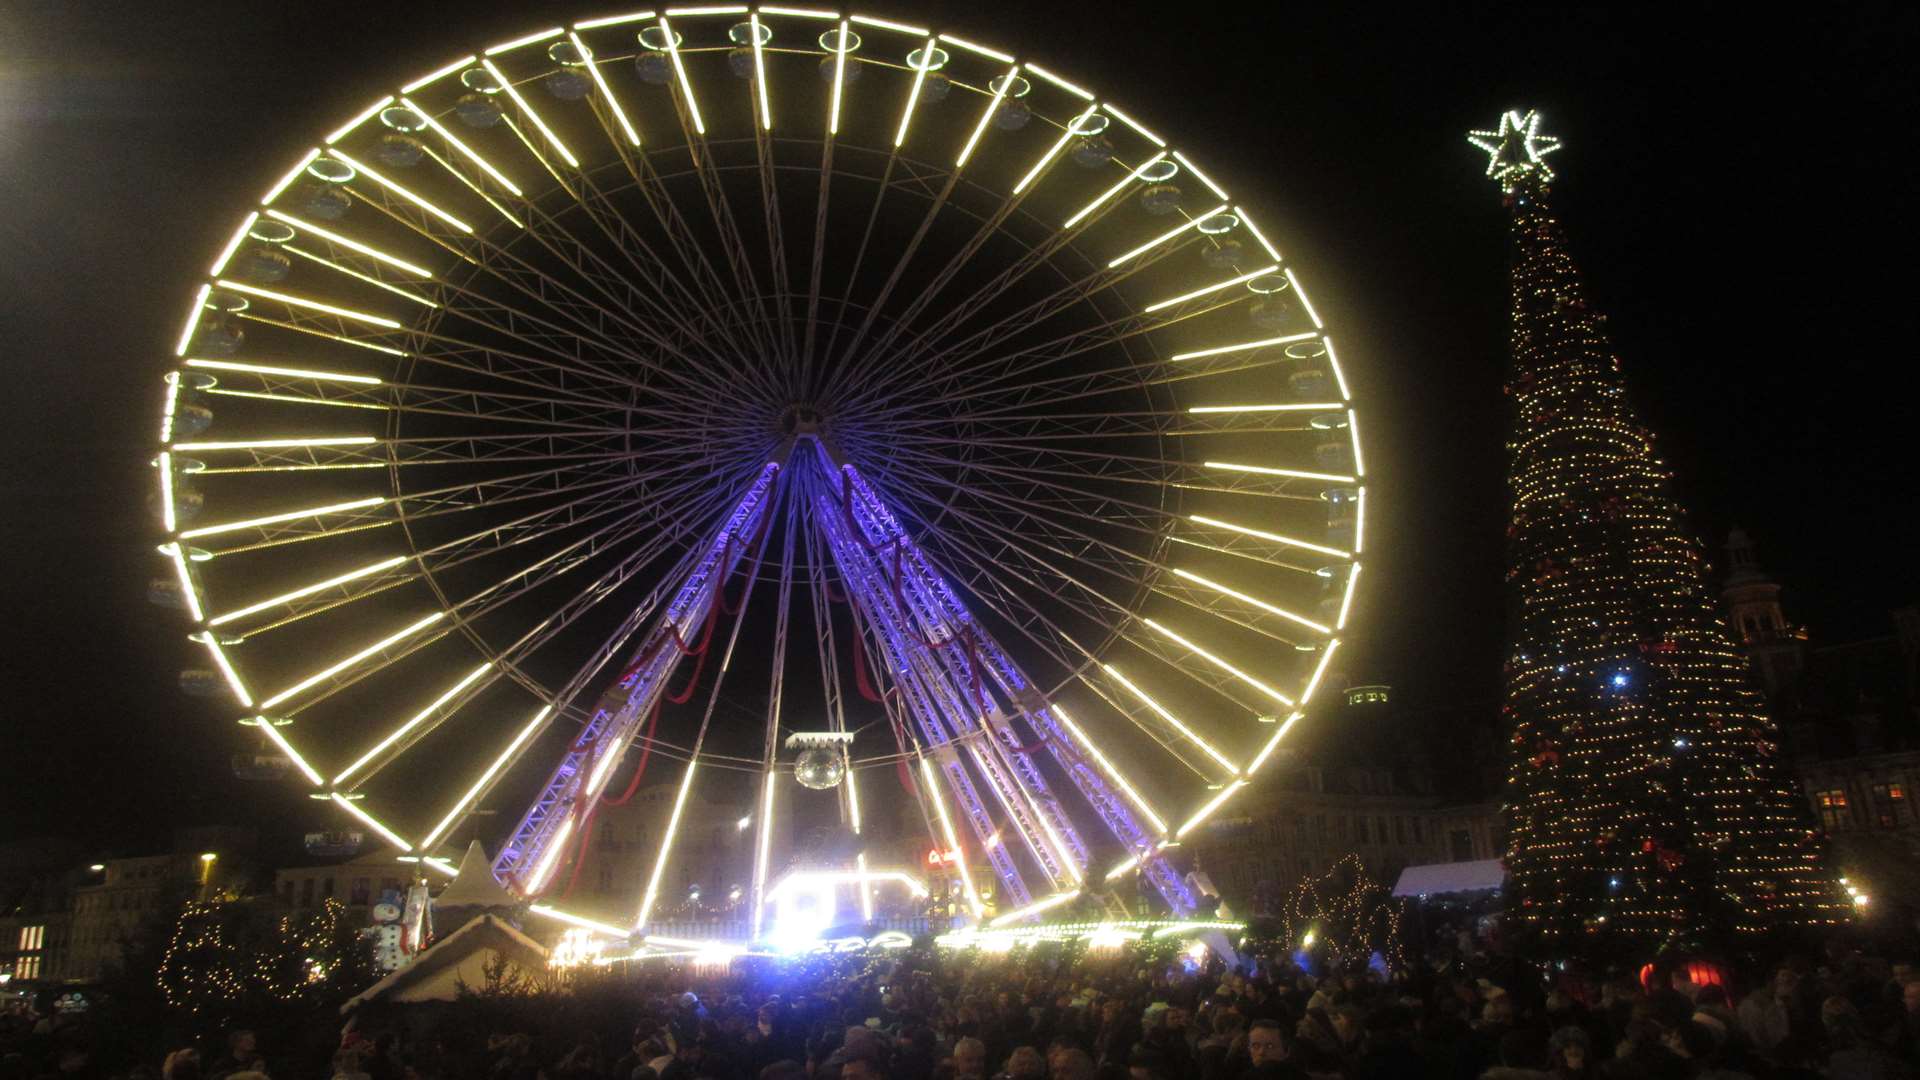 The impressive 50 metre high big wheel turns majestically above the Grand’Place. Picture: Mike Rees